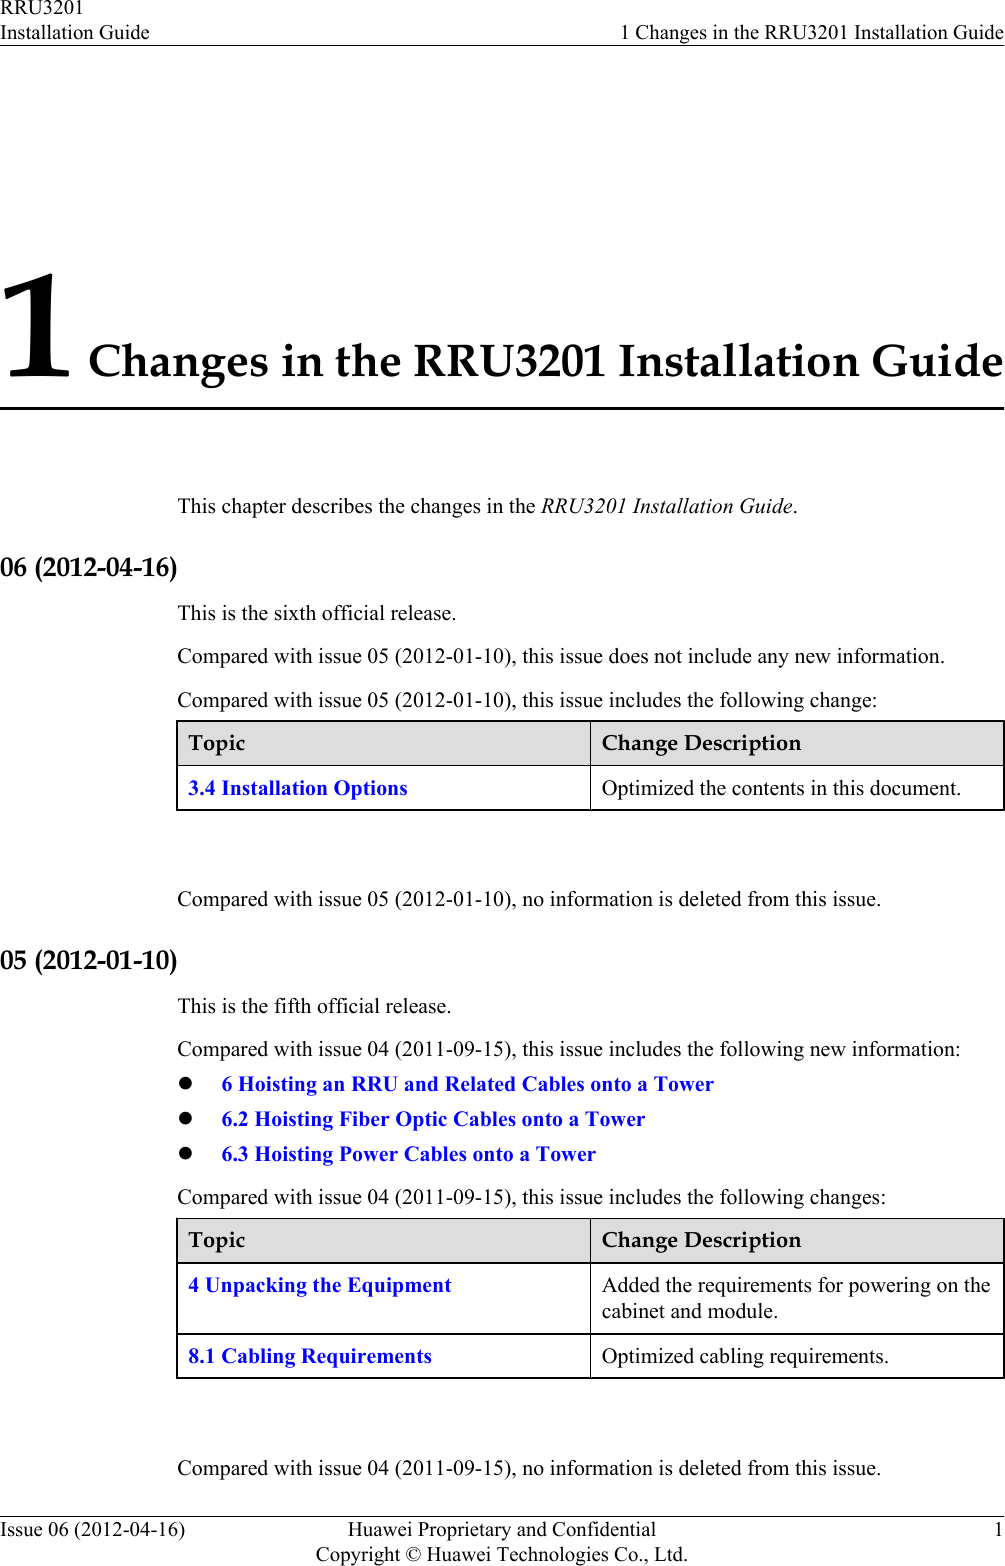 1 Changes in the RRU3201 Installation GuideThis chapter describes the changes in the RRU3201 Installation Guide.06 (2012-04-16)This is the sixth official release.Compared with issue 05 (2012-01-10), this issue does not include any new information.Compared with issue 05 (2012-01-10), this issue includes the following change:Topic Change Description3.4 Installation Options Optimized the contents in this document. Compared with issue 05 (2012-01-10), no information is deleted from this issue.05 (2012-01-10)This is the fifth official release.Compared with issue 04 (2011-09-15), this issue includes the following new information:l6 Hoisting an RRU and Related Cables onto a Towerl6.2 Hoisting Fiber Optic Cables onto a Towerl6.3 Hoisting Power Cables onto a TowerCompared with issue 04 (2011-09-15), this issue includes the following changes:Topic Change Description4 Unpacking the Equipment Added the requirements for powering on thecabinet and module.8.1 Cabling Requirements Optimized cabling requirements. Compared with issue 04 (2011-09-15), no information is deleted from this issue.RRU3201Installation Guide 1 Changes in the RRU3201 Installation GuideIssue 06 (2012-04-16) Huawei Proprietary and ConfidentialCopyright © Huawei Technologies Co., Ltd.1